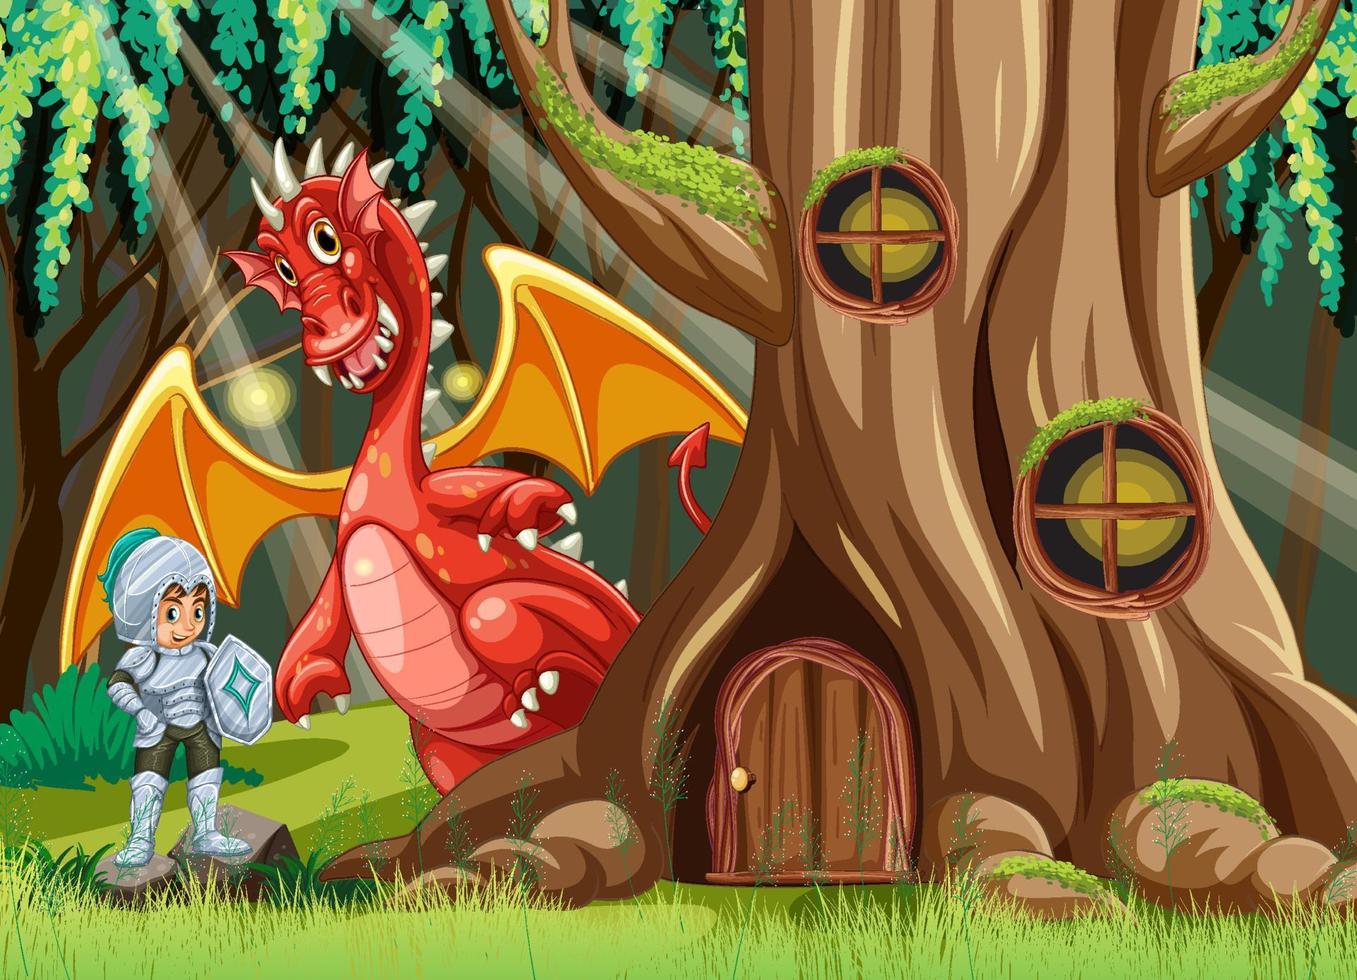 Cartoon dragon and knight in enchanted forest background vector